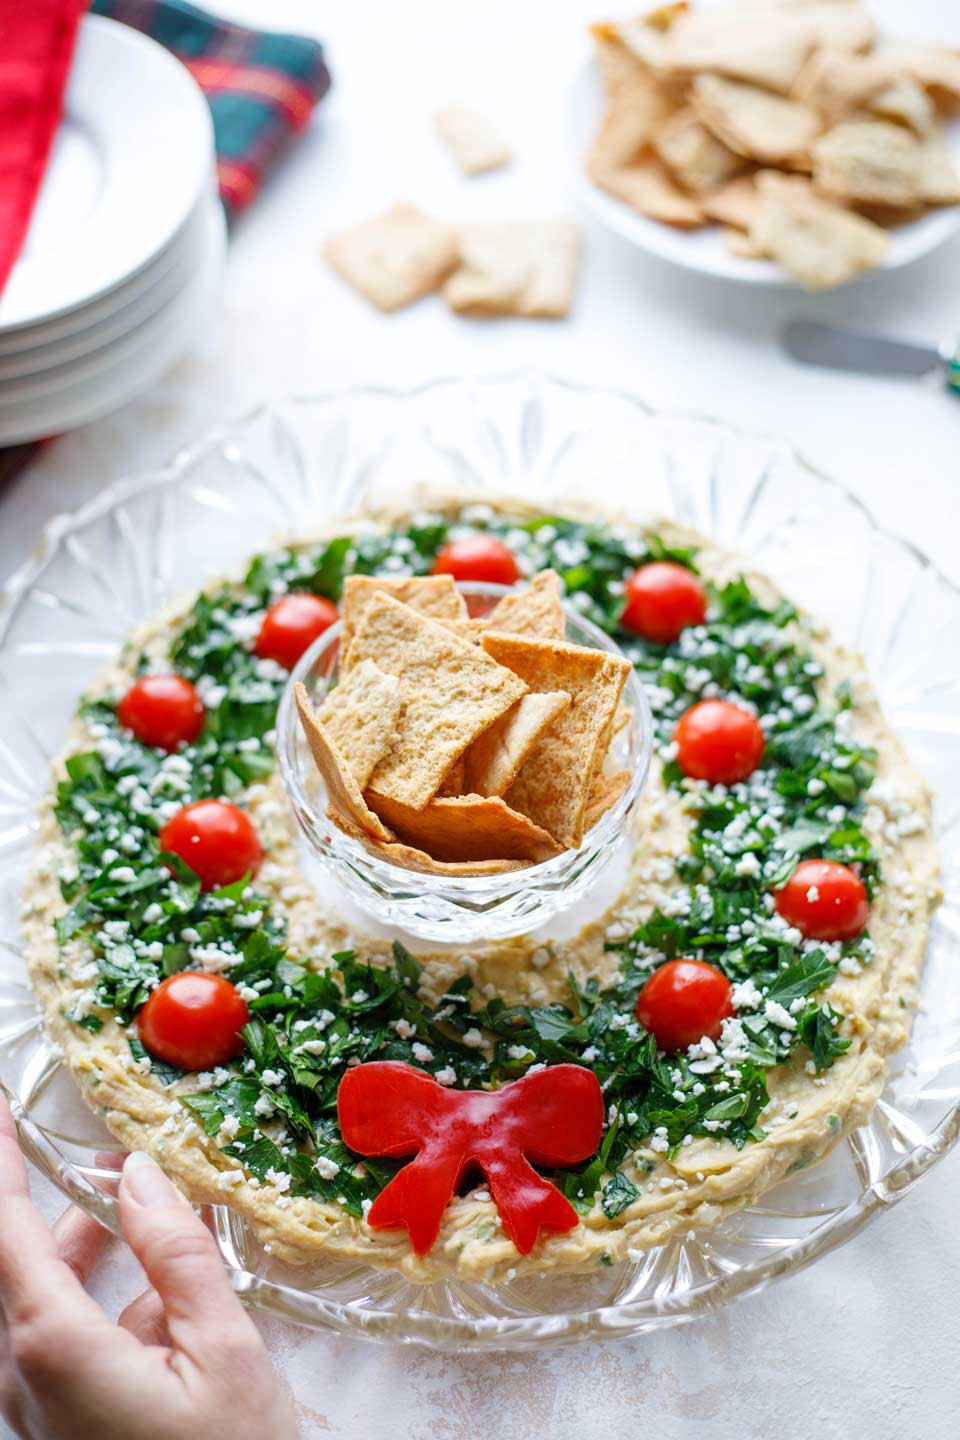 Healthy Holiday Appetizers
 Easy Christmas Appetizer "Hummus Wreath" Two Healthy